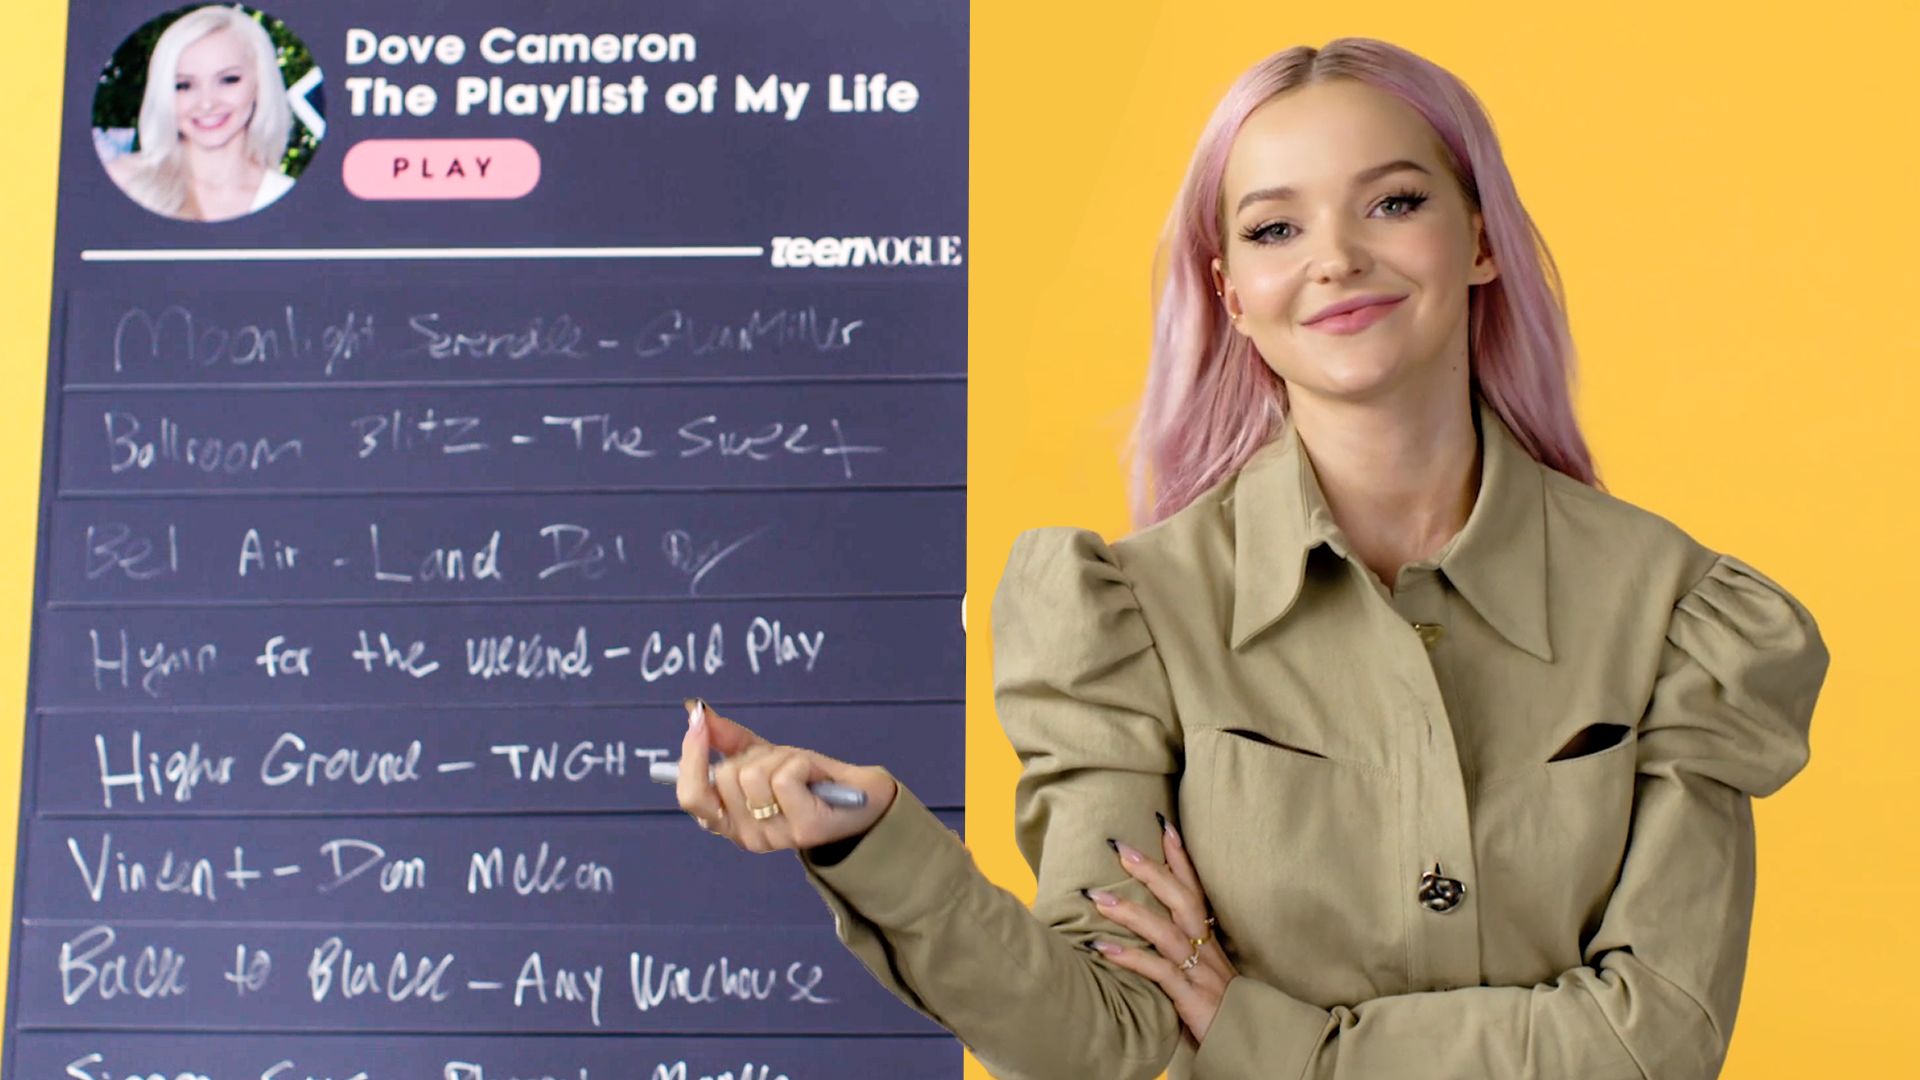 Dove Cameron песни. Boyfriend dove Cameron текст. The playlist of your Life. The love of her life